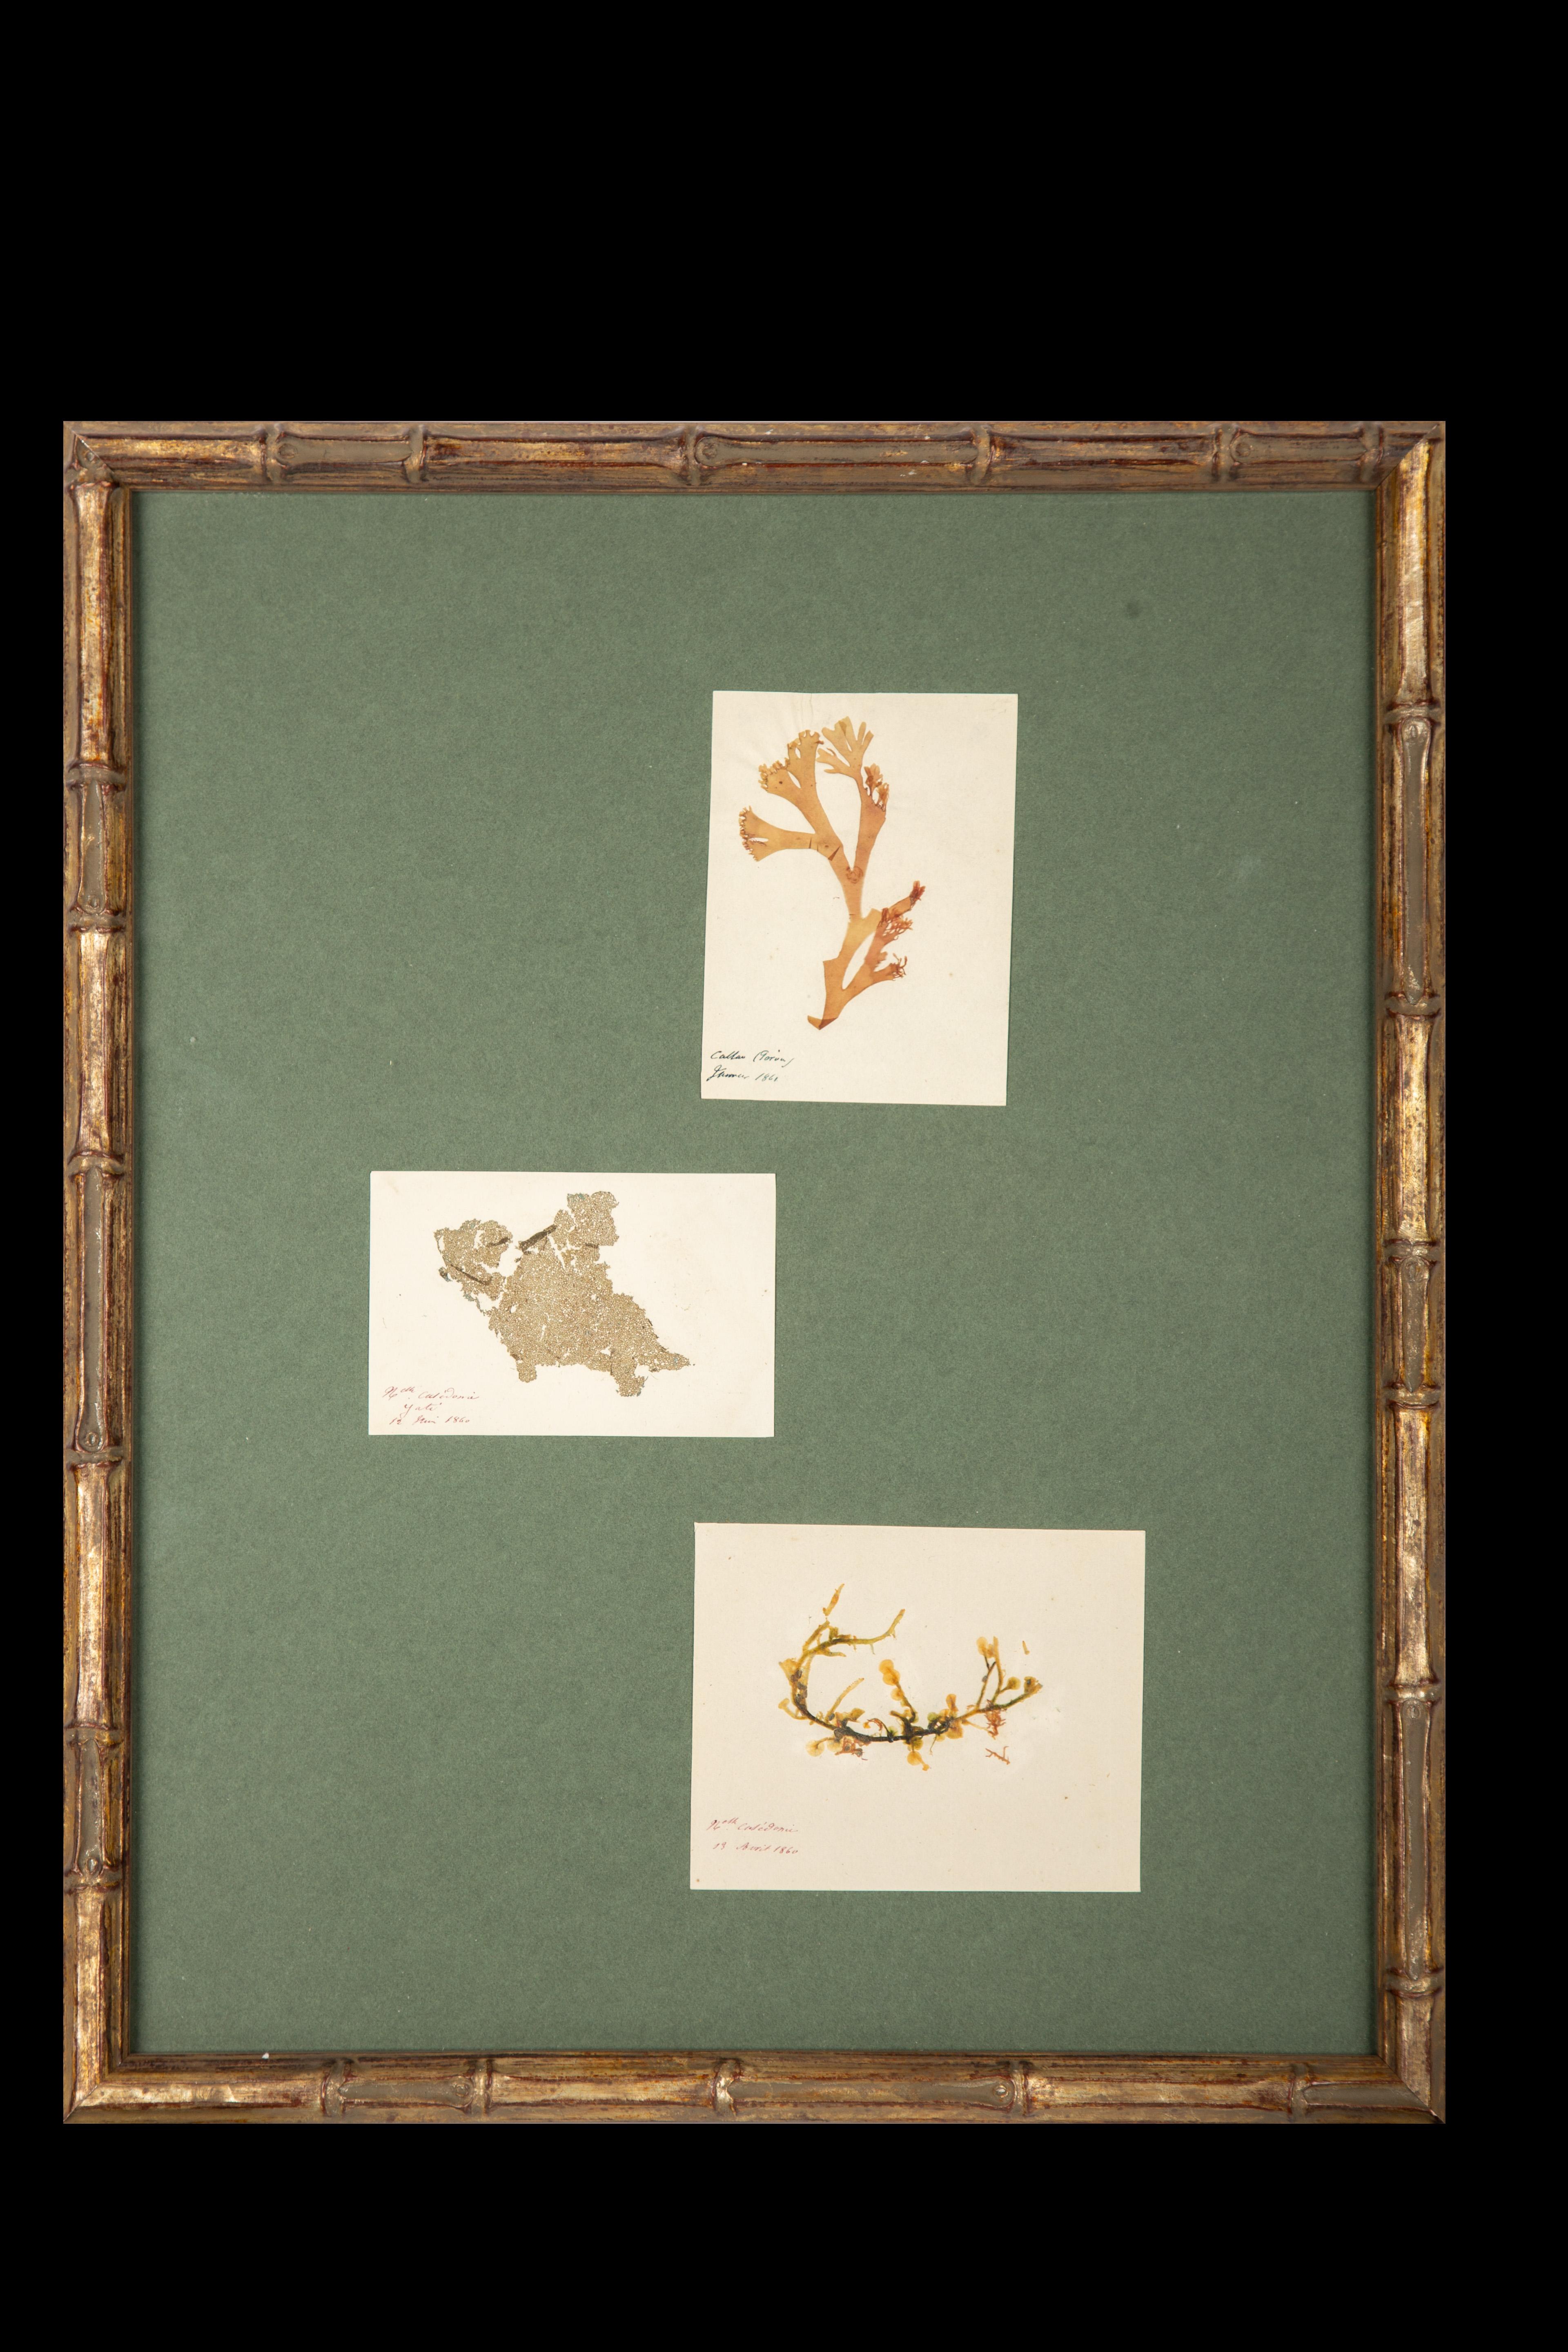 Paper Framed and Pressed French Alguier Specimens from the 19th Century